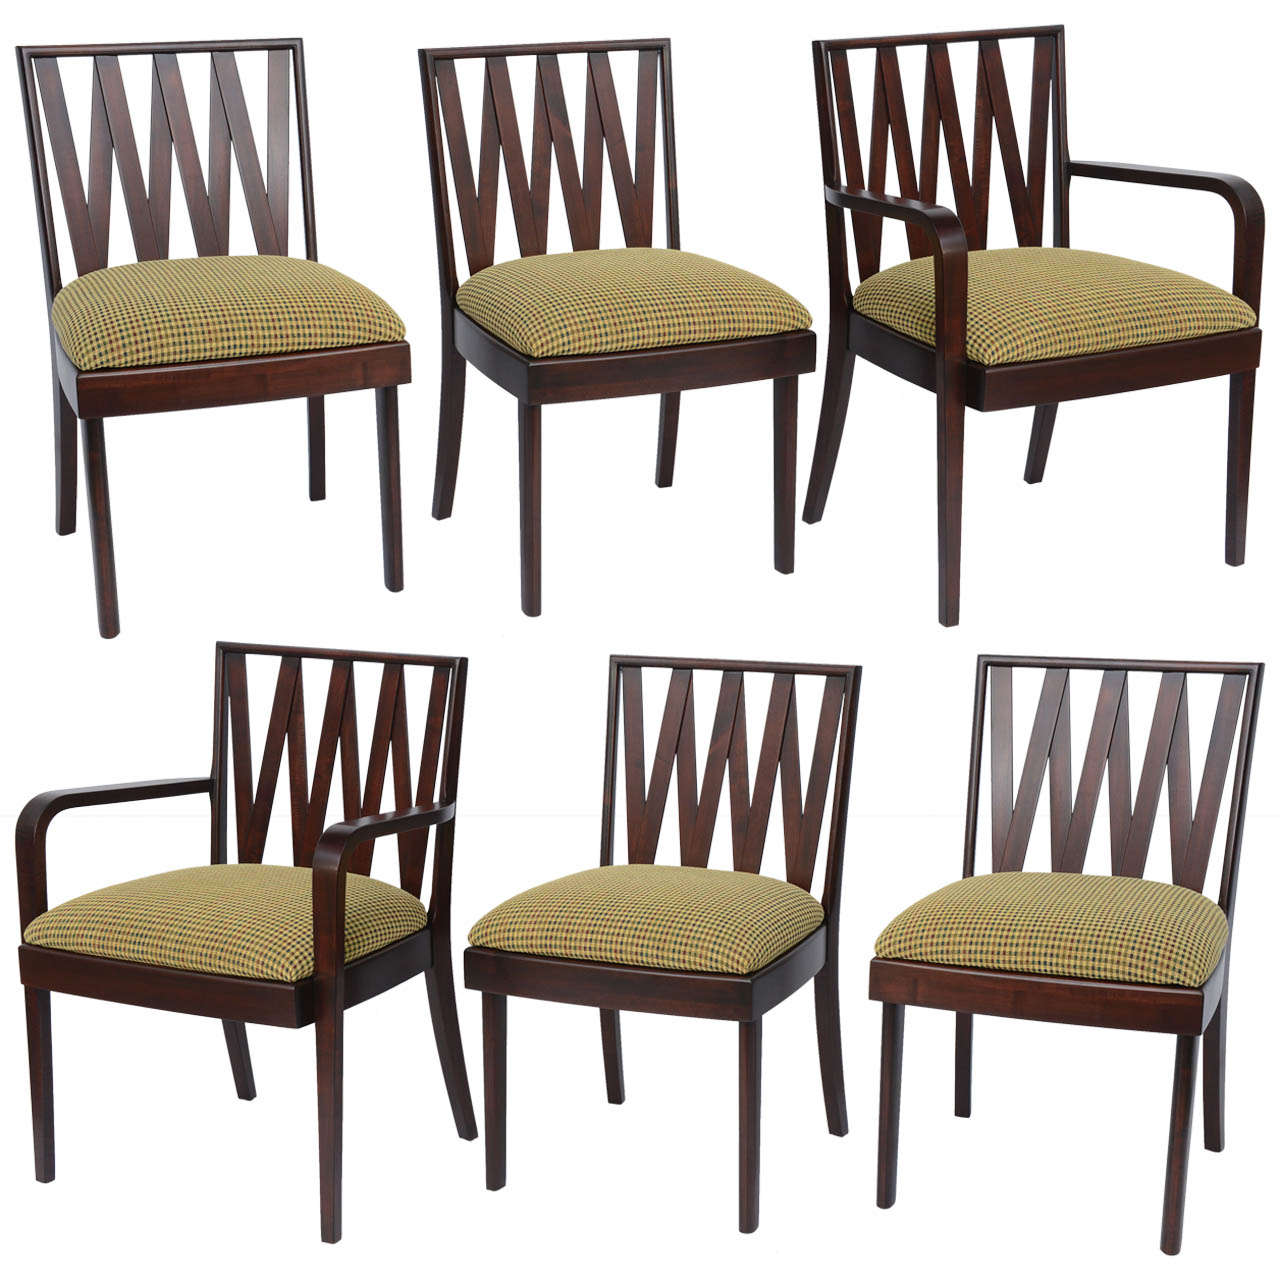 Classic 1940s Paul Frankl Dining Chairs for Johnson Furniture